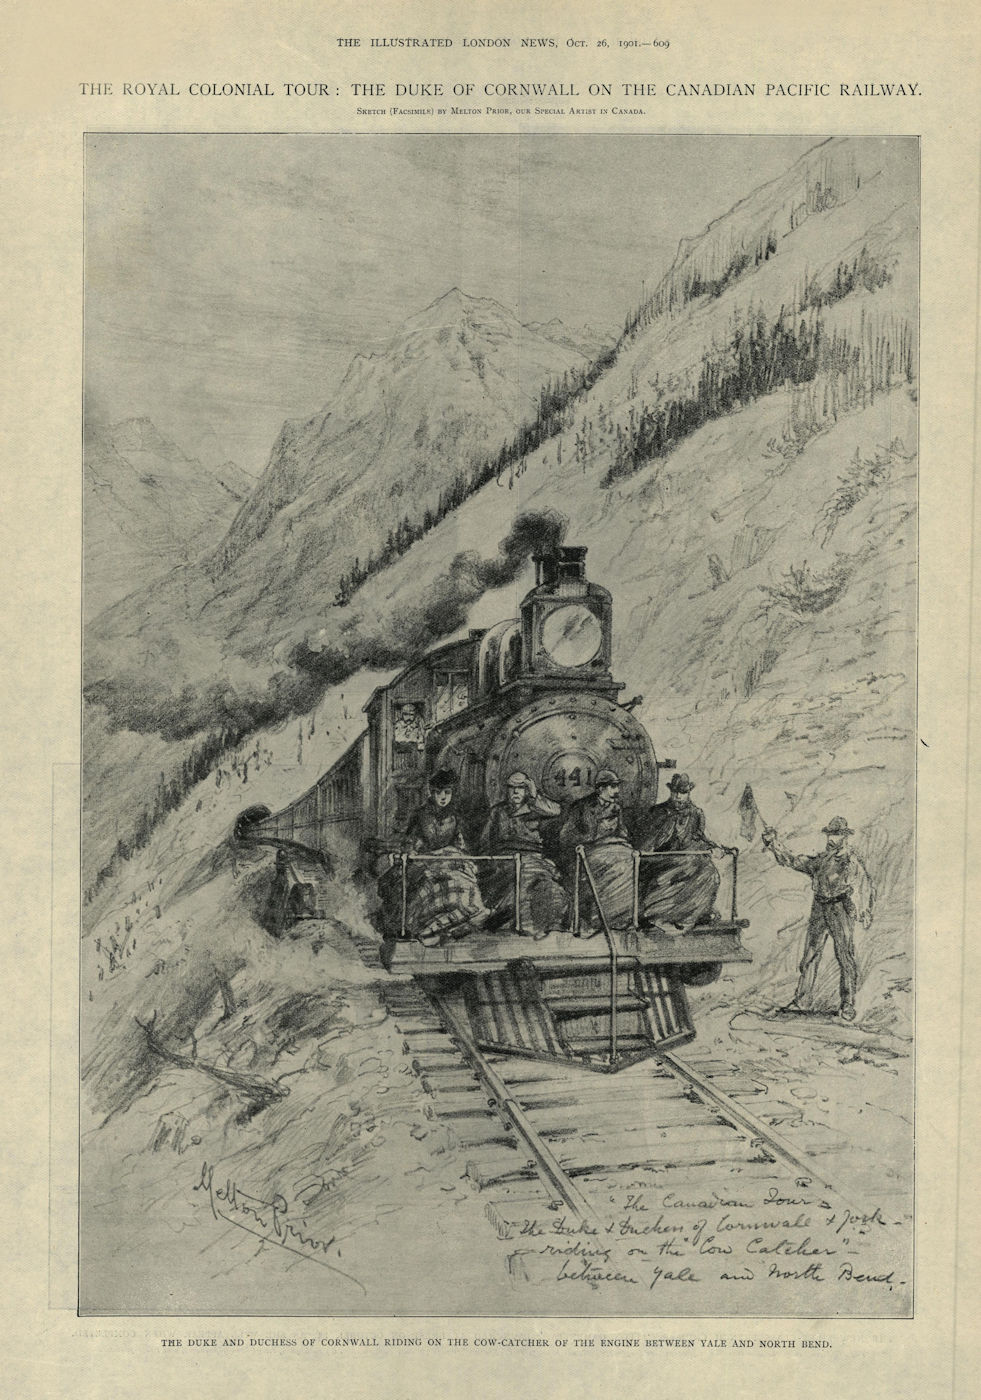 Associate Product Canadian Pacific Railway: The Duke riding a cow-catcher. Yale to North Bend 1901